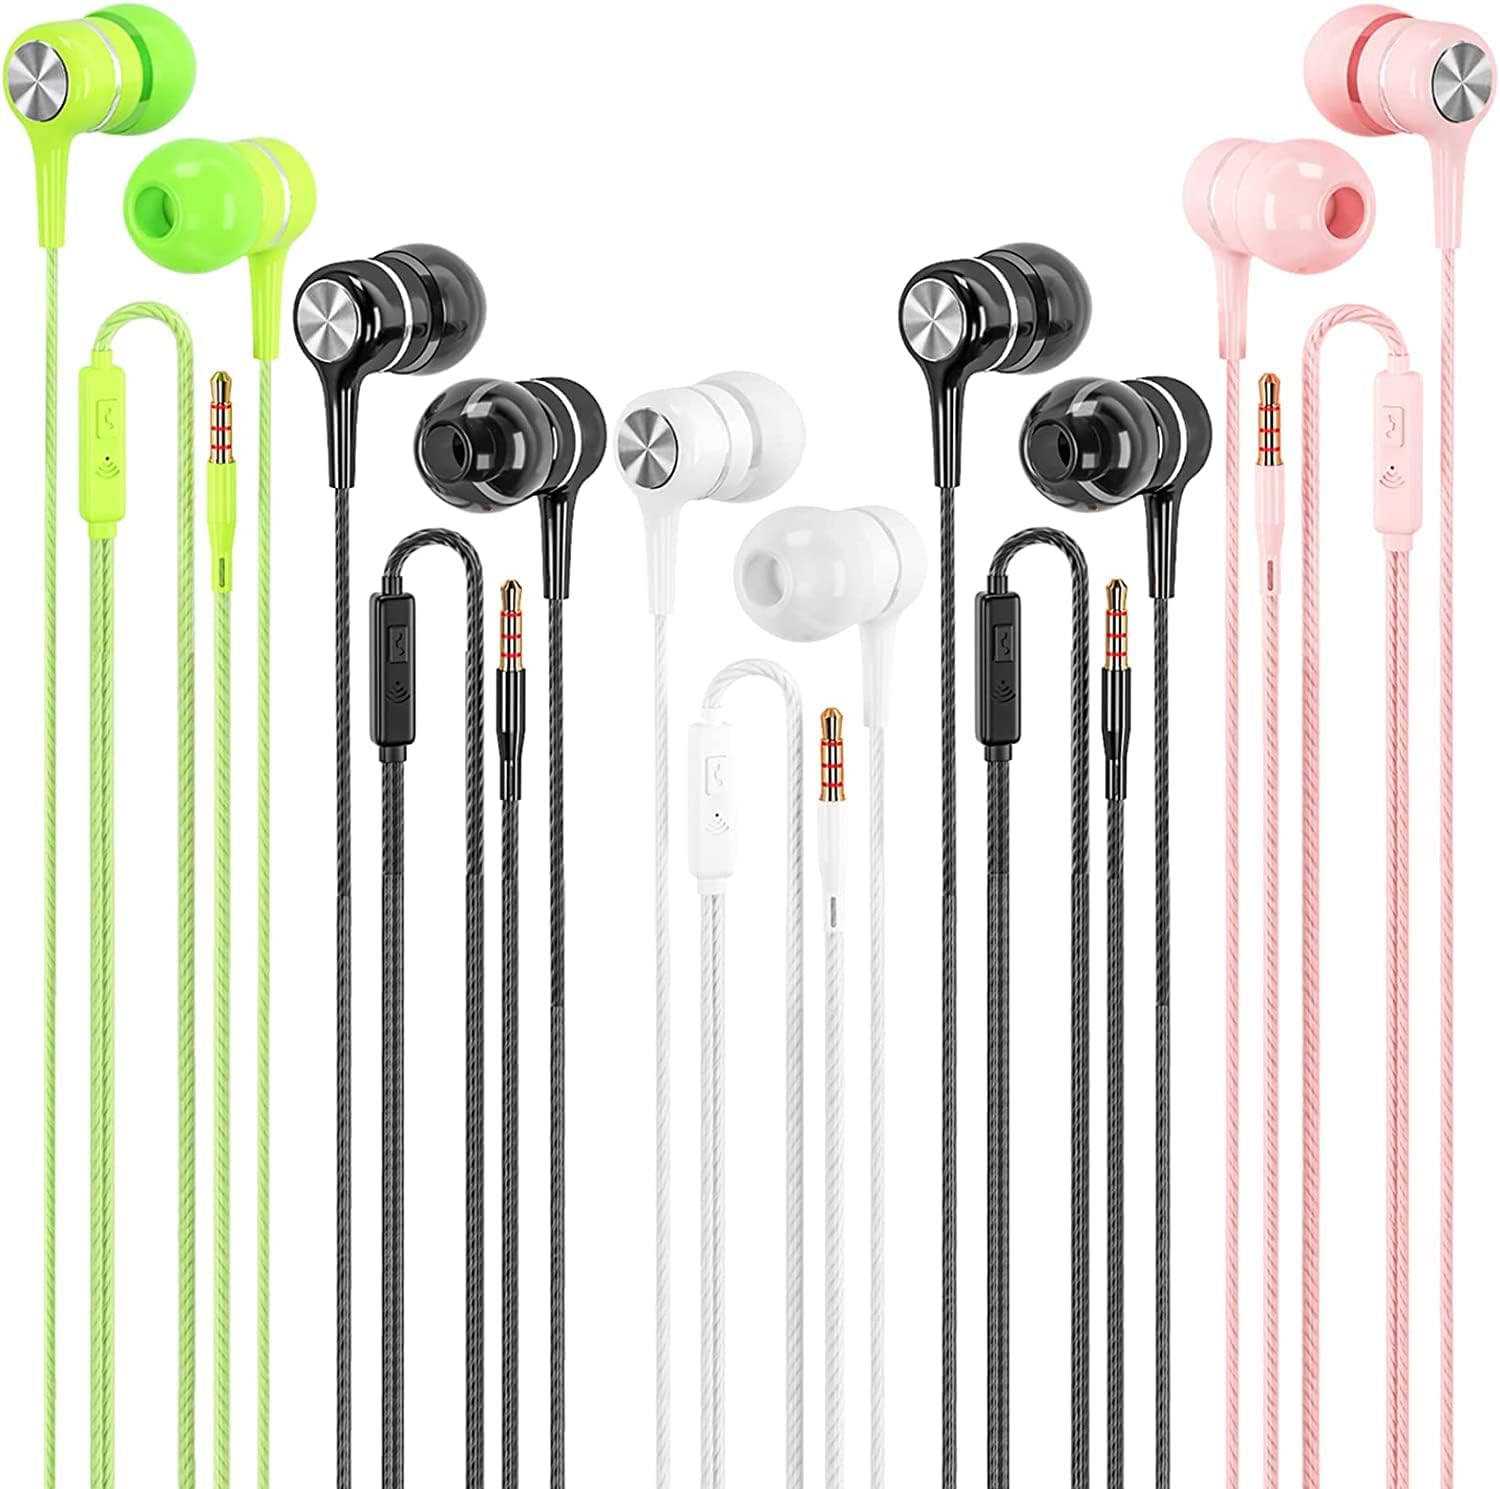 Wired Earbuds with Microphone 5 Pack, in-Ear Headphones with Heavy Bass, High Sound Quality Earphones Compatible with iPad, Laptop, MP3, Android Smartphones, Fits All 3.5mm Jack Device